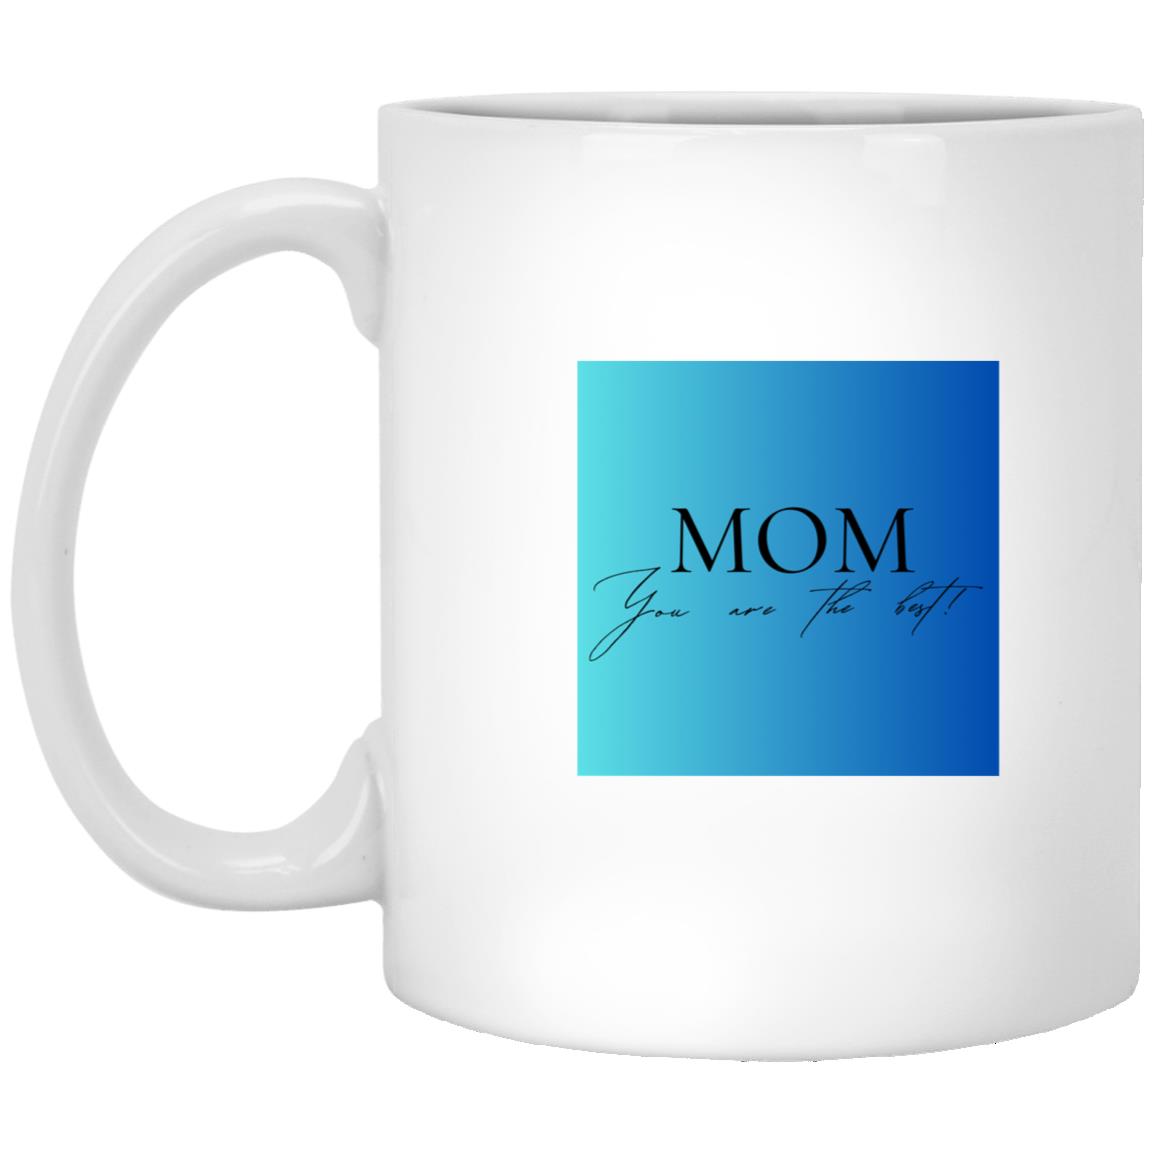 Mom You are the best - White Mug (Style 19)